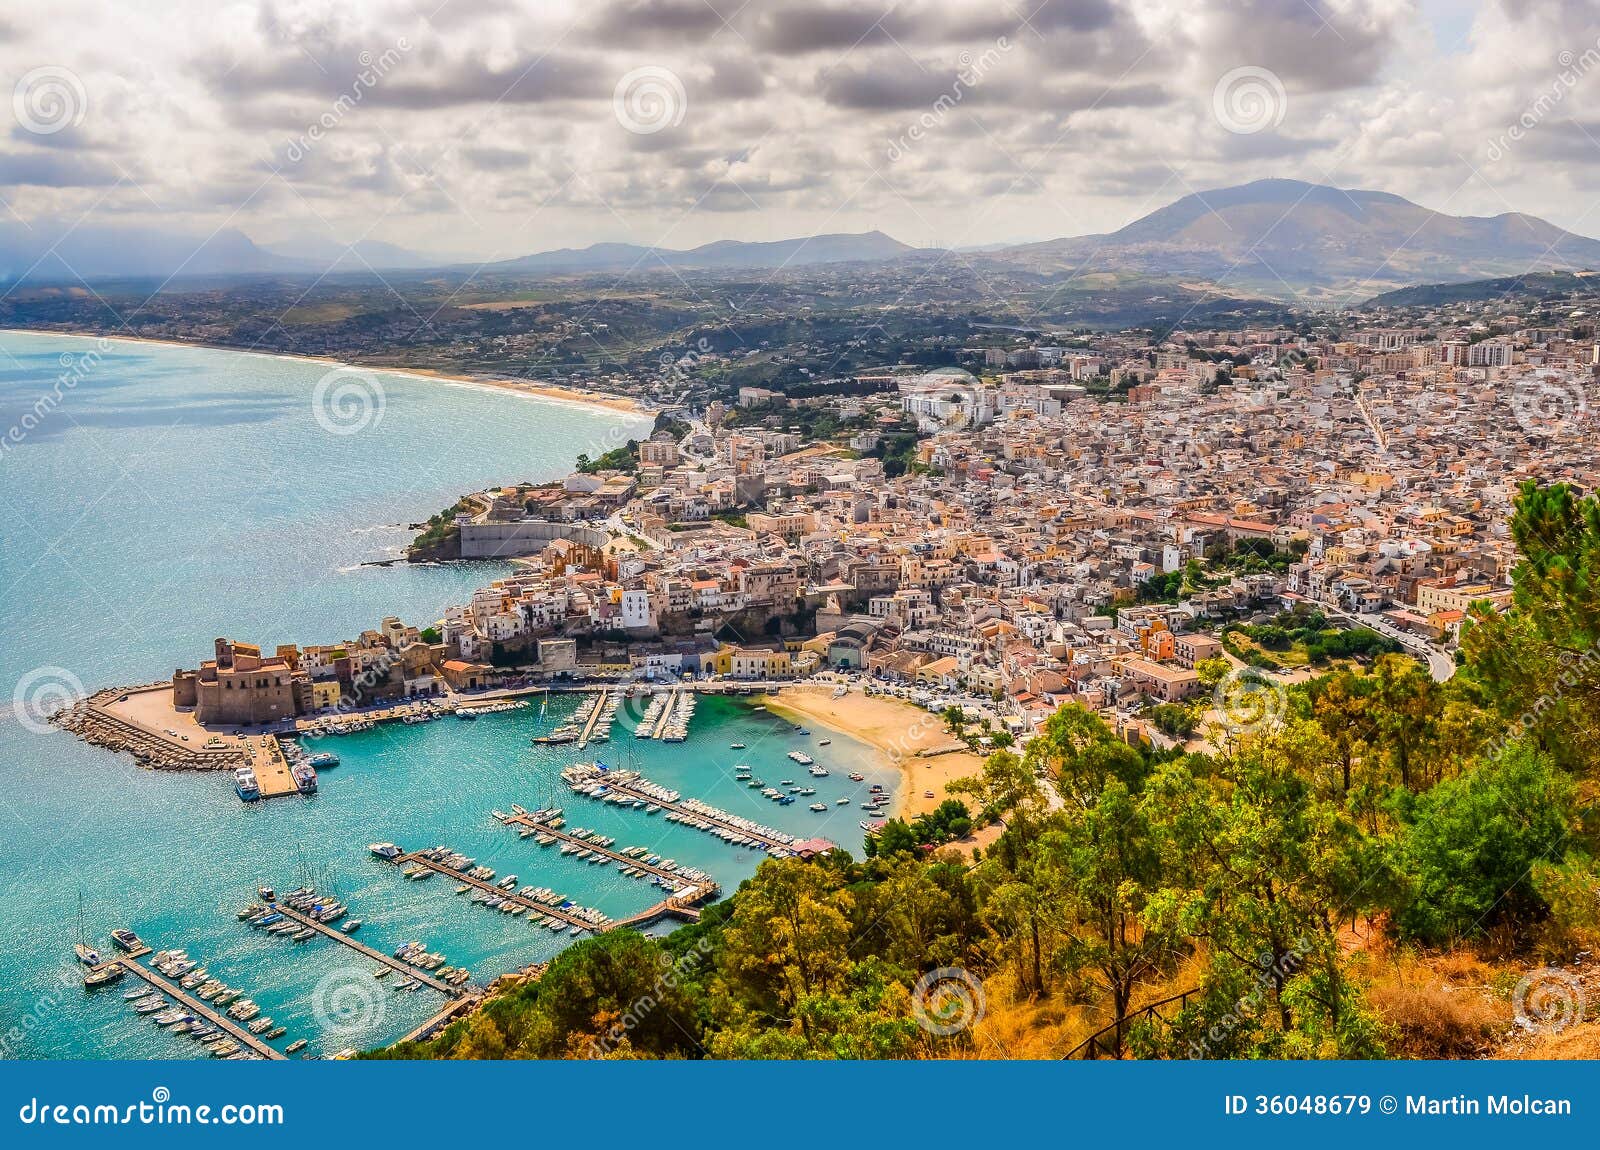 scenic view of trapani town and harbor in sicily